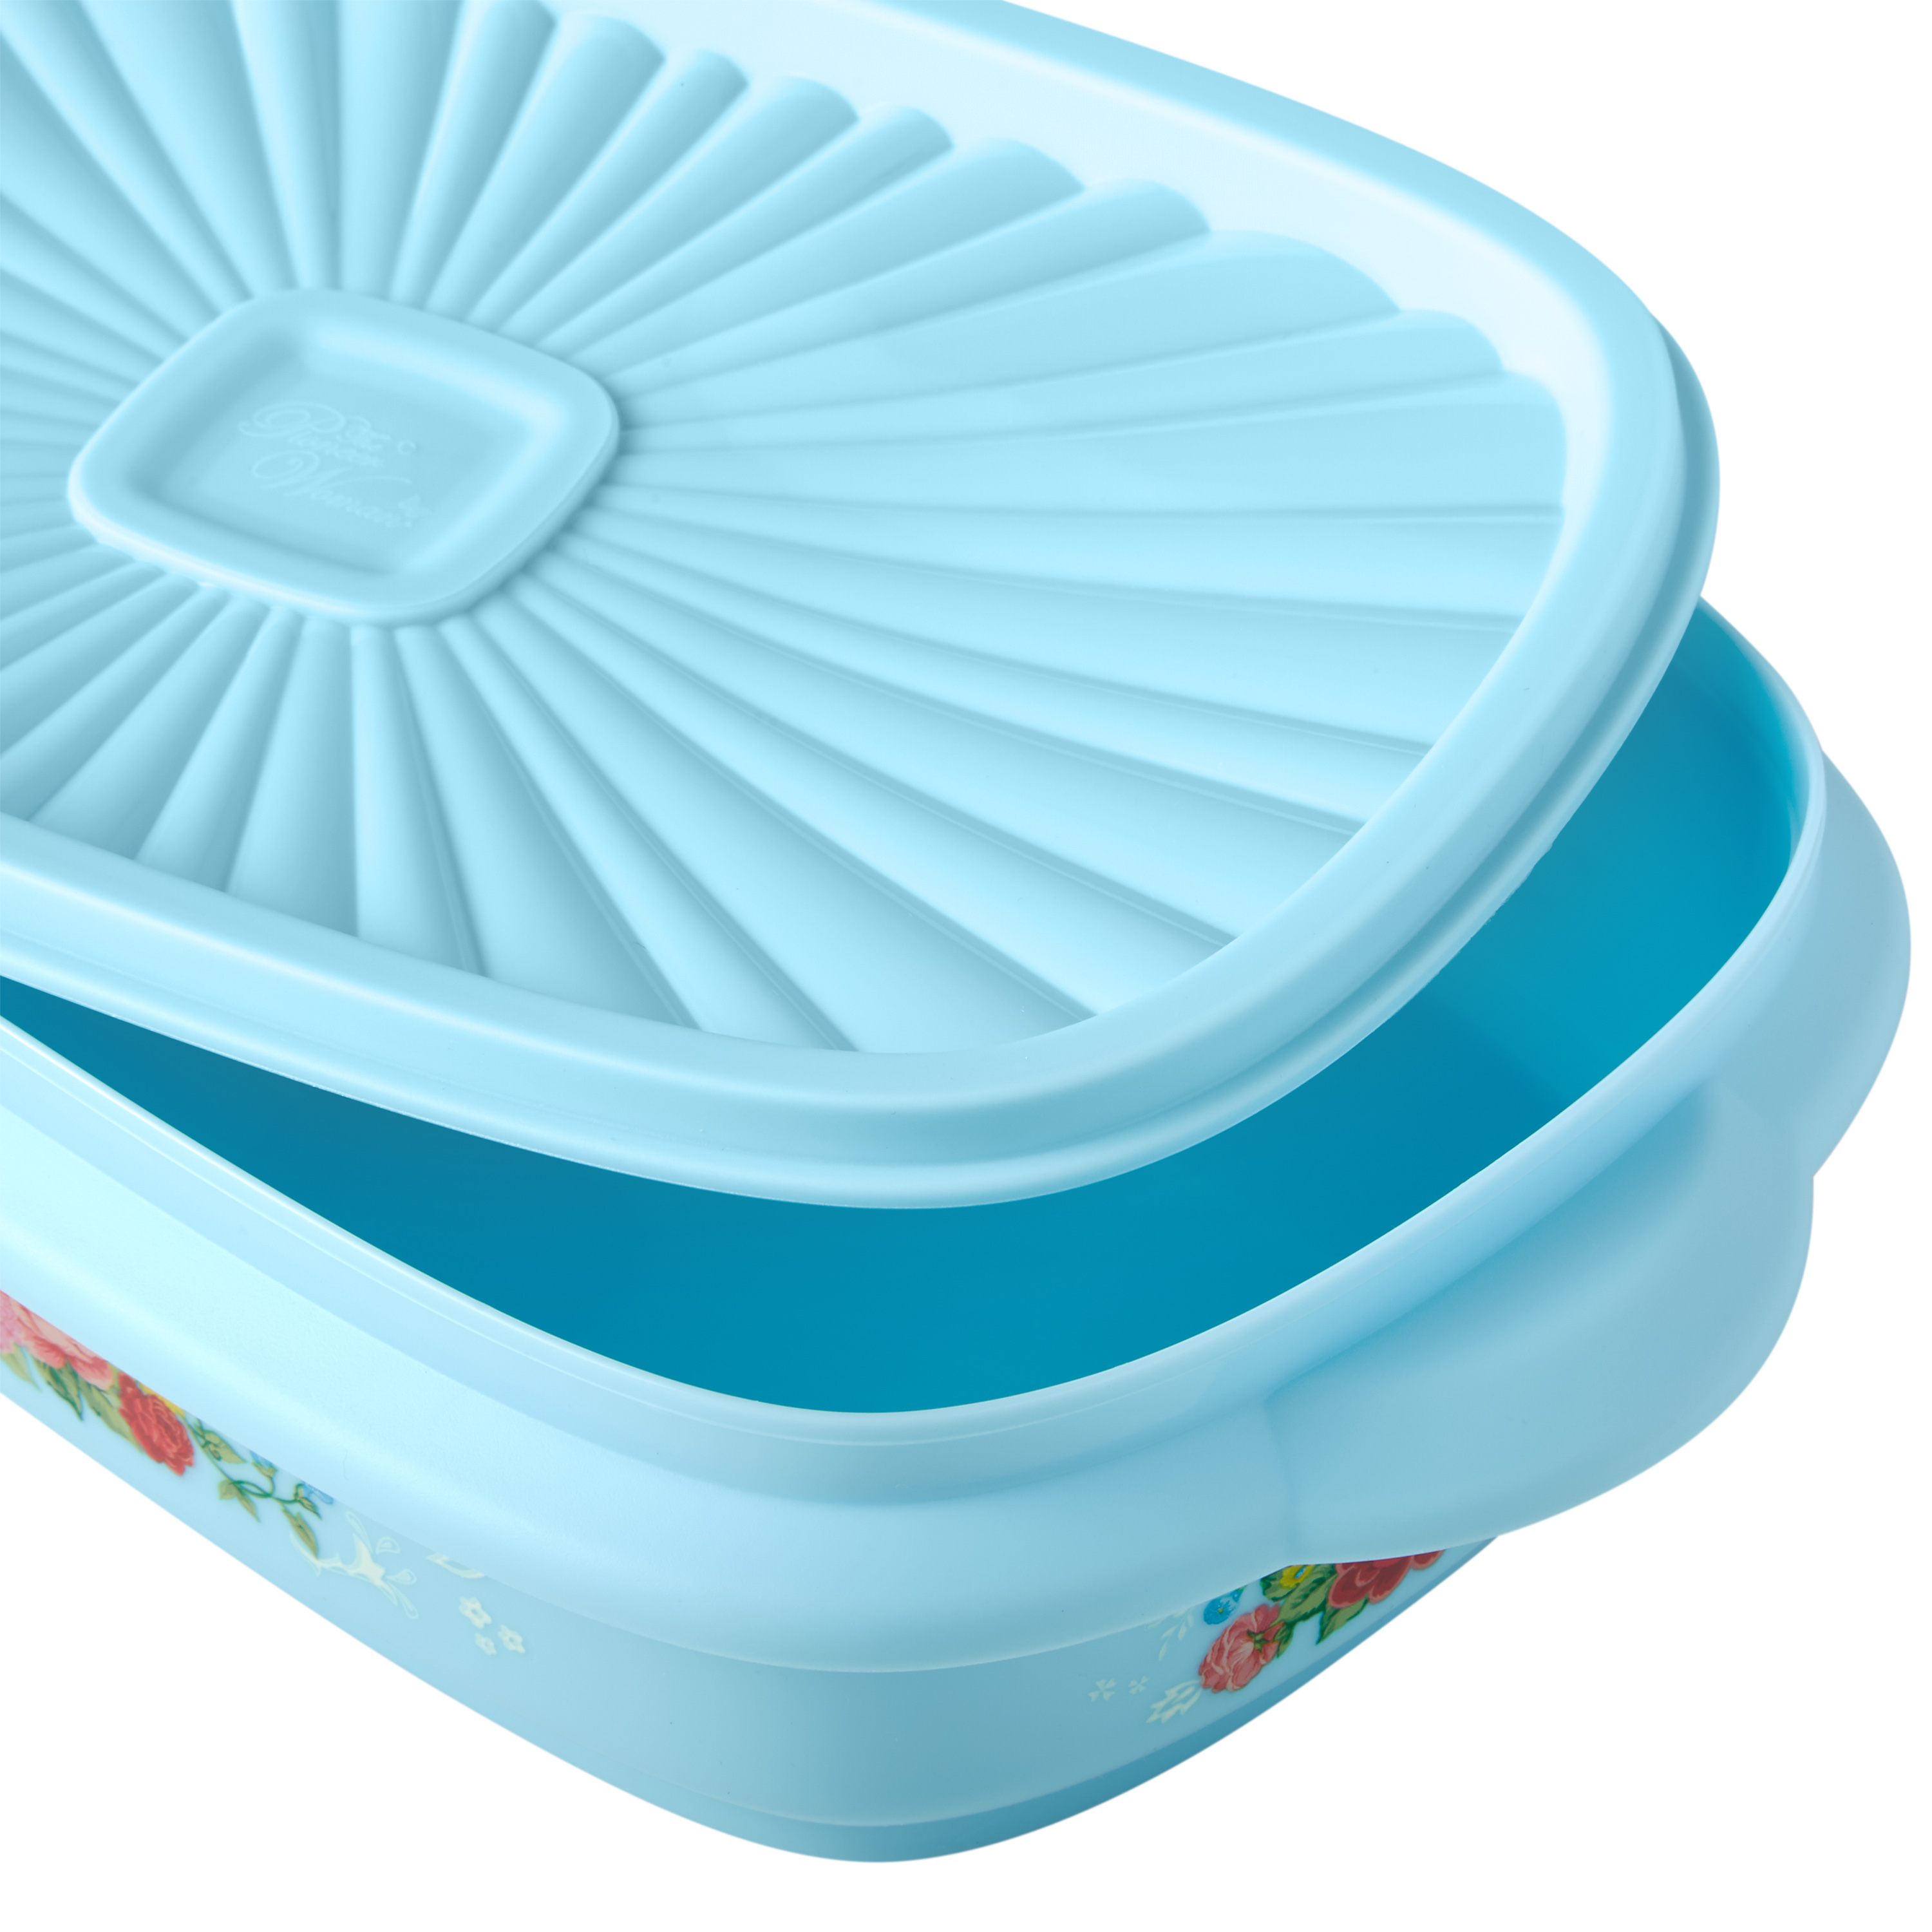 The Pioneer Woman 20 Piece Plastic Food Storage Container Variety Set, Sweet Rose - image 2 of 4